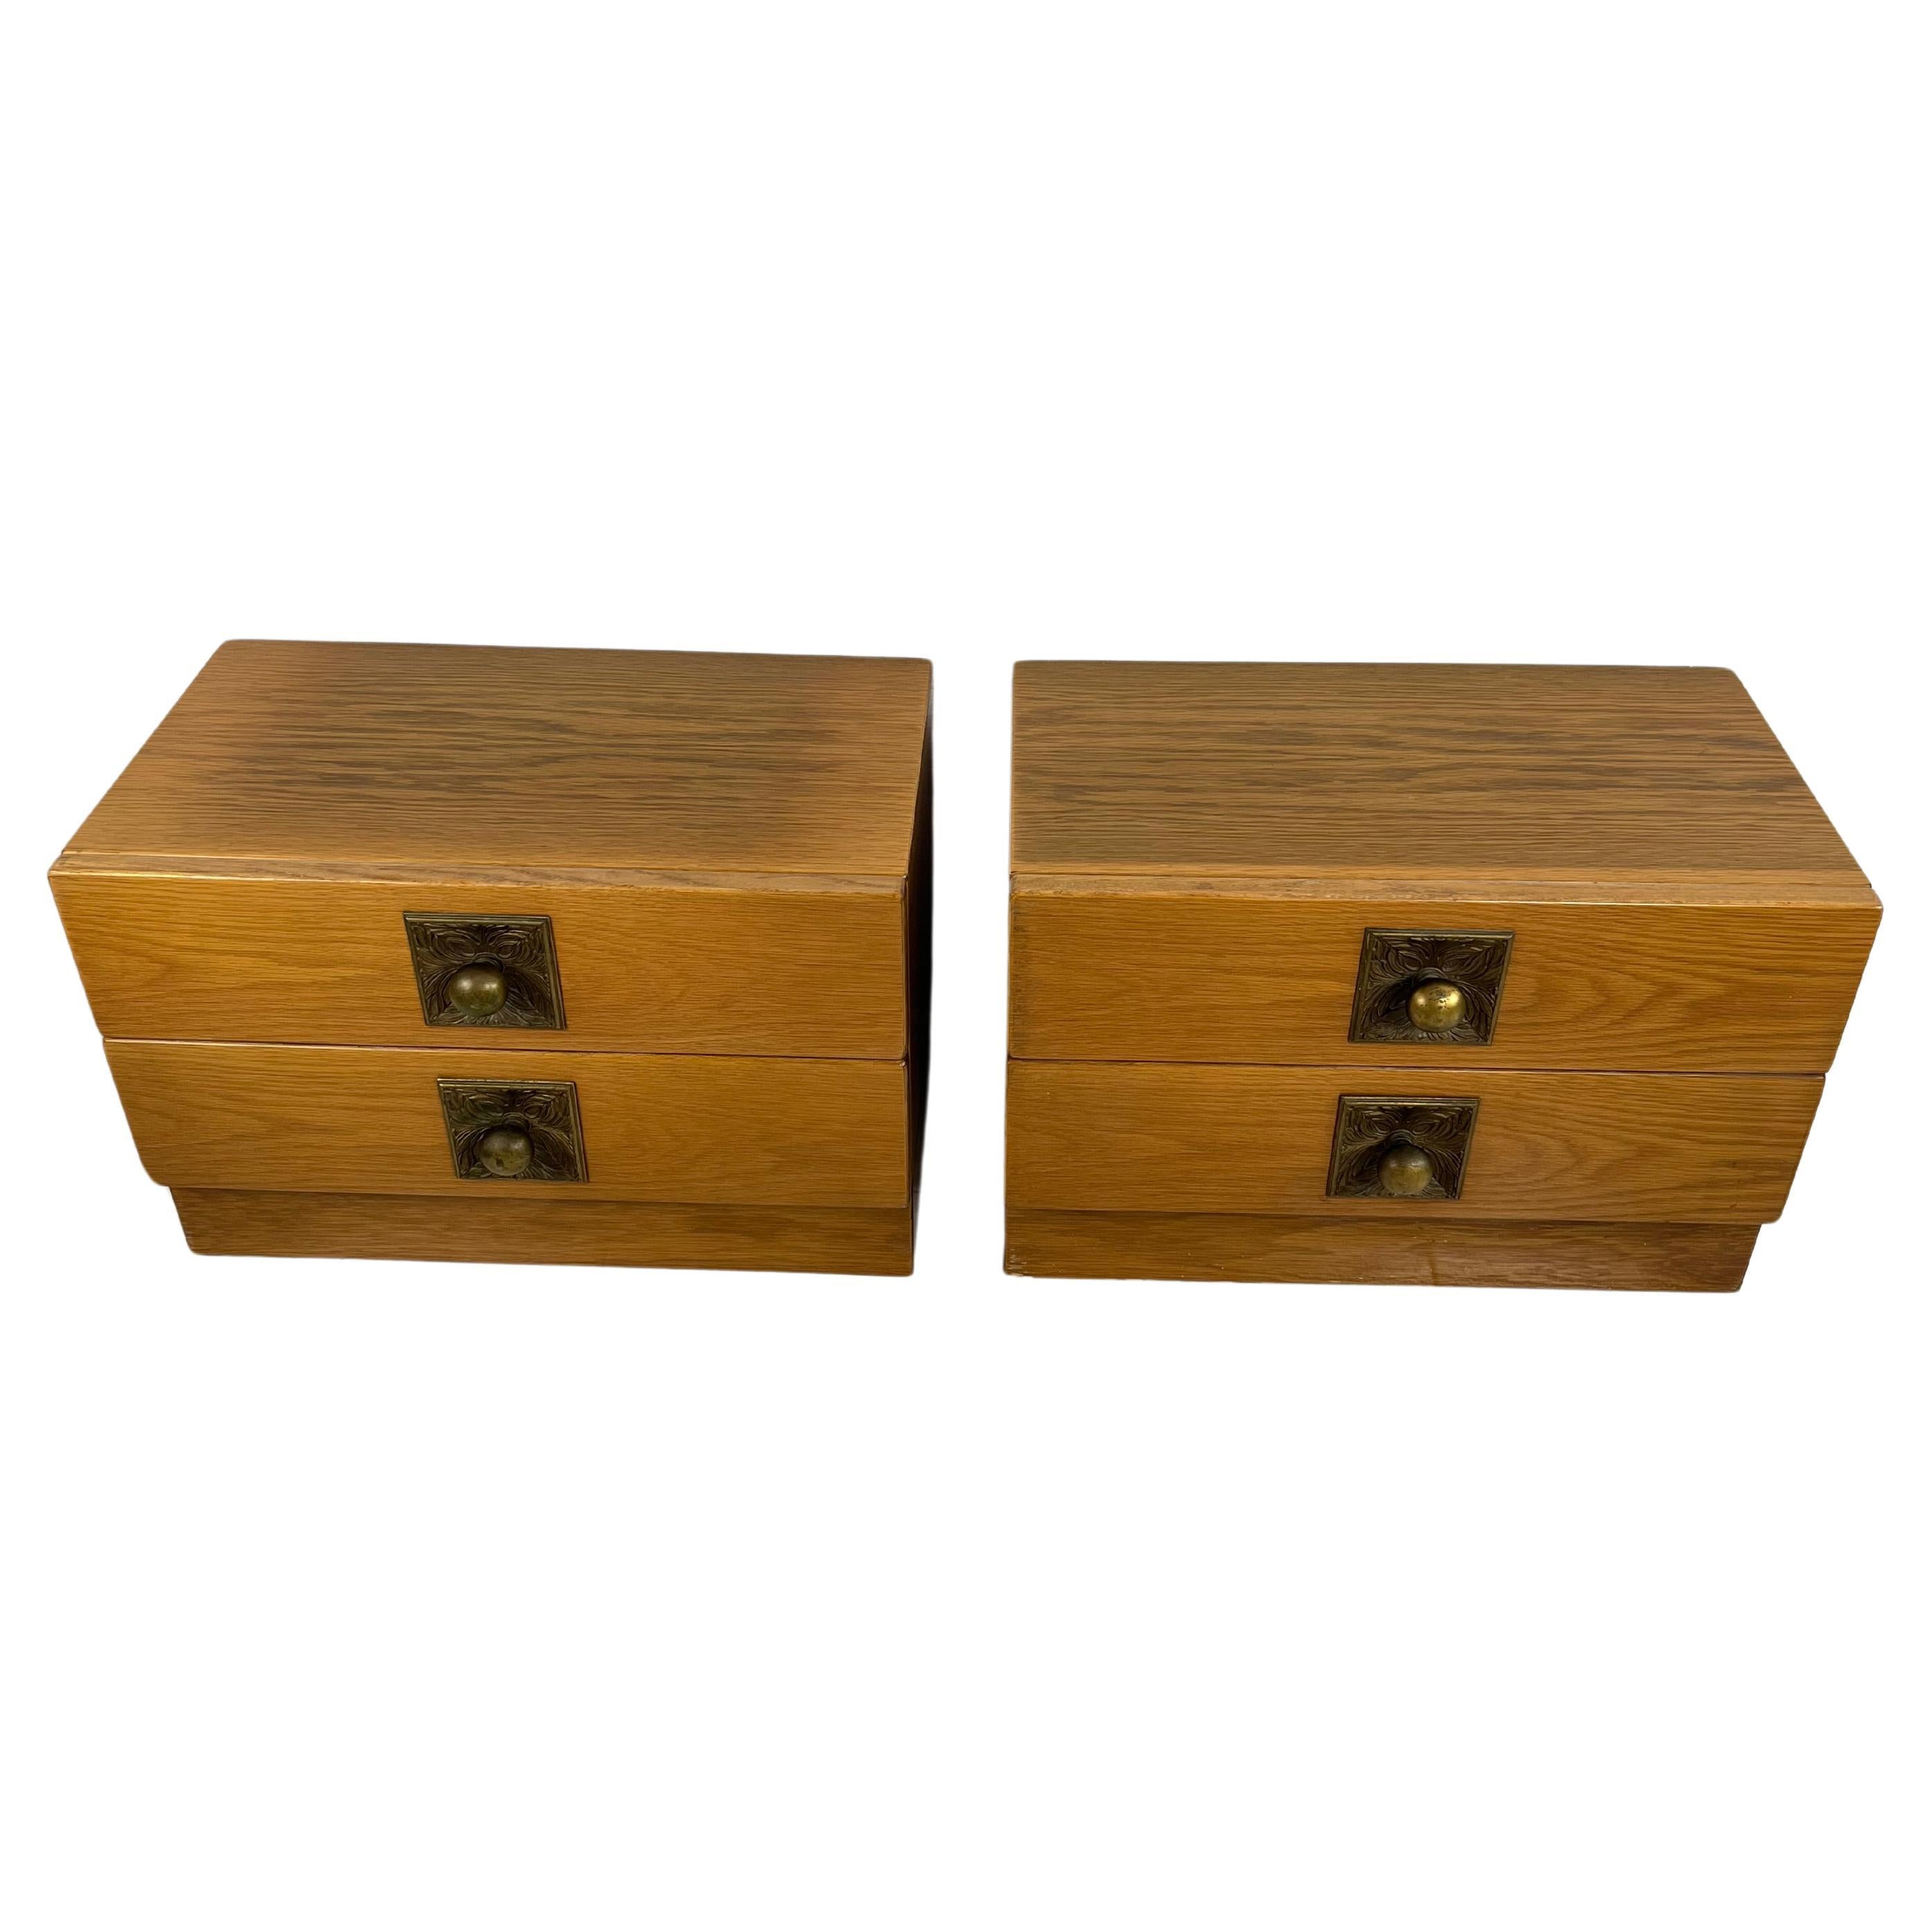 Set of 2 Mid-Century Scandinavian Minimalist Wood and Brass Nightstands with Drawers. Attributed to Johannes Andersen  1960s.
 Intact and in good condition, small signs of aging.